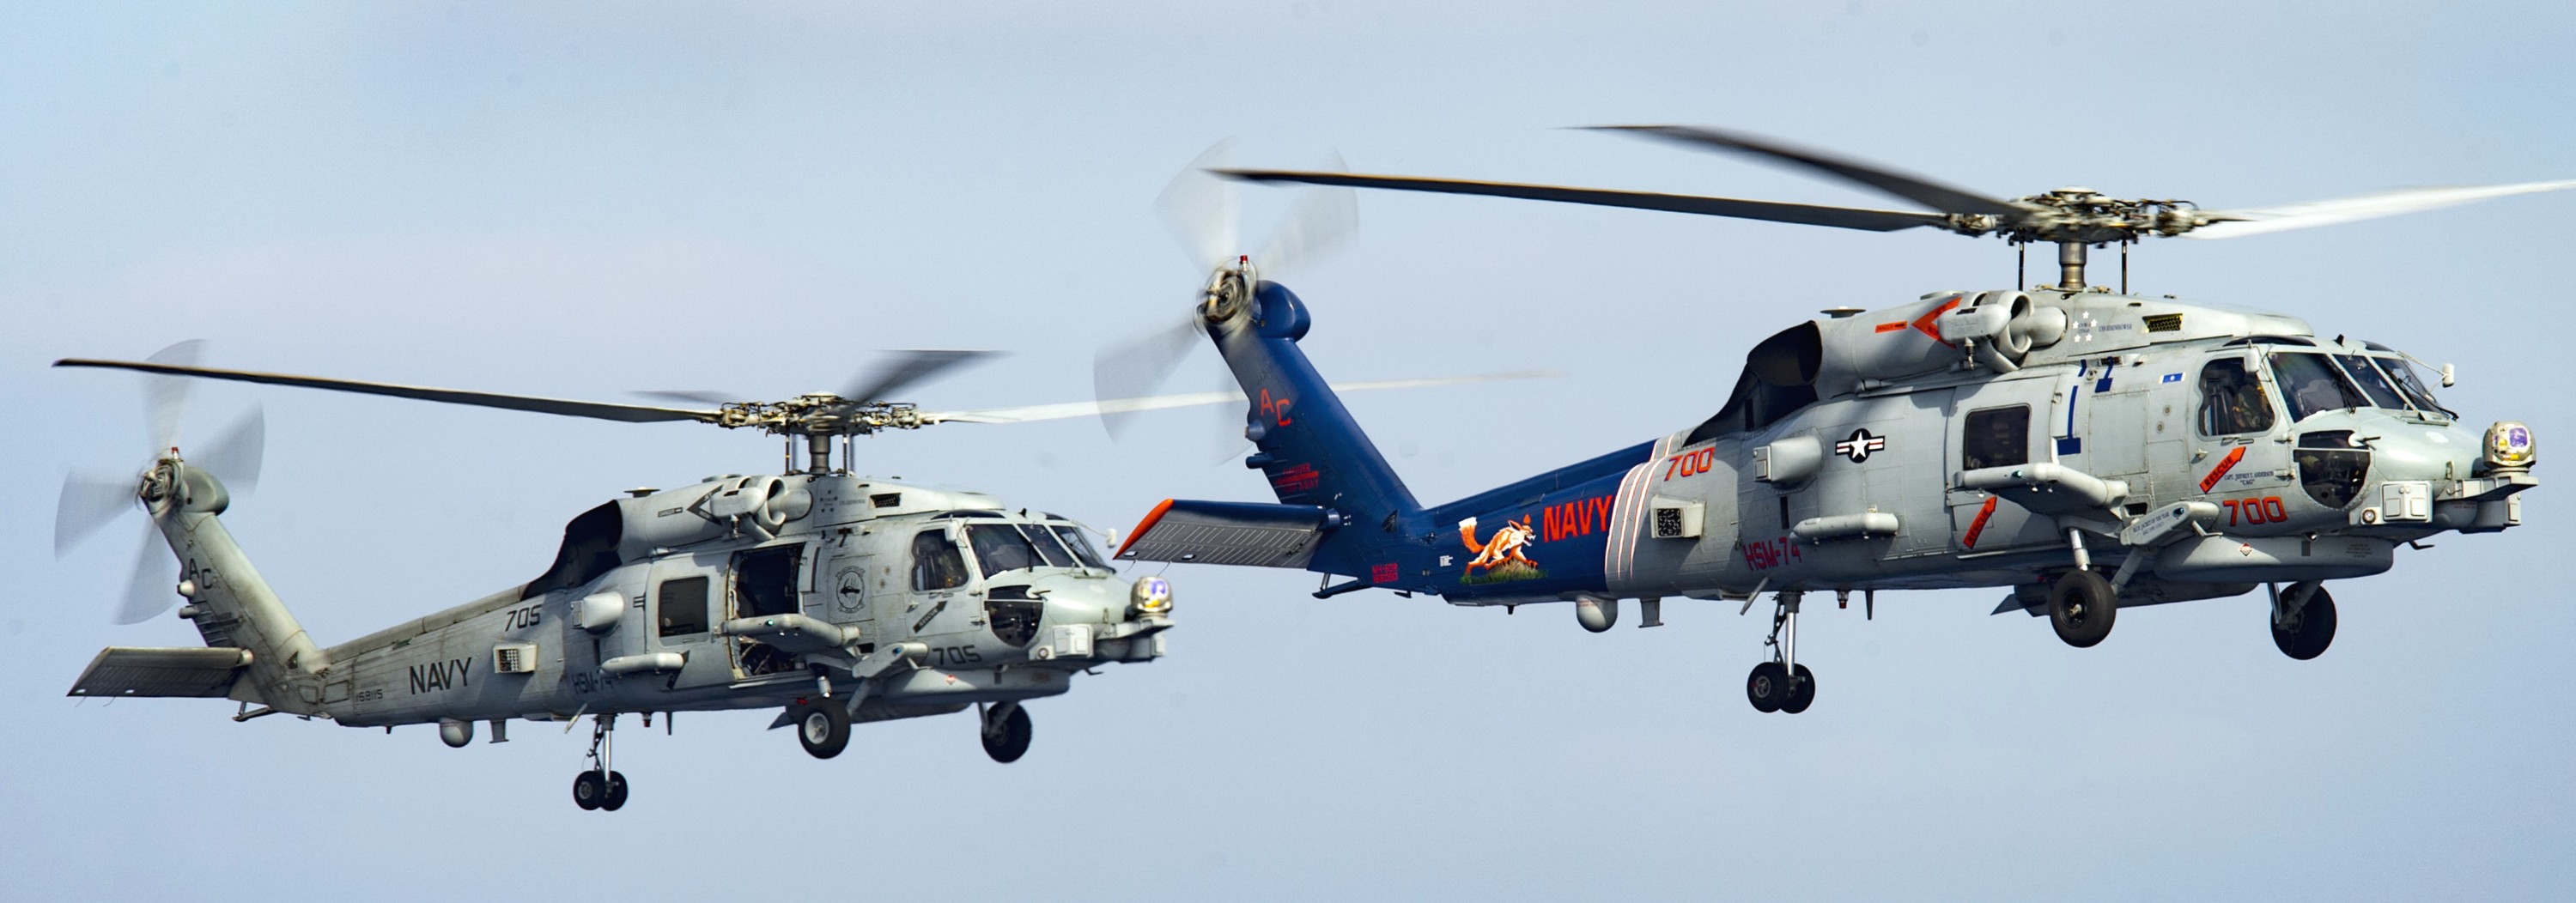 hsm-74 swamp foxes helicopter maritime strike squadron us navy mh-60r seahawk 2016 47 special painting color scheme